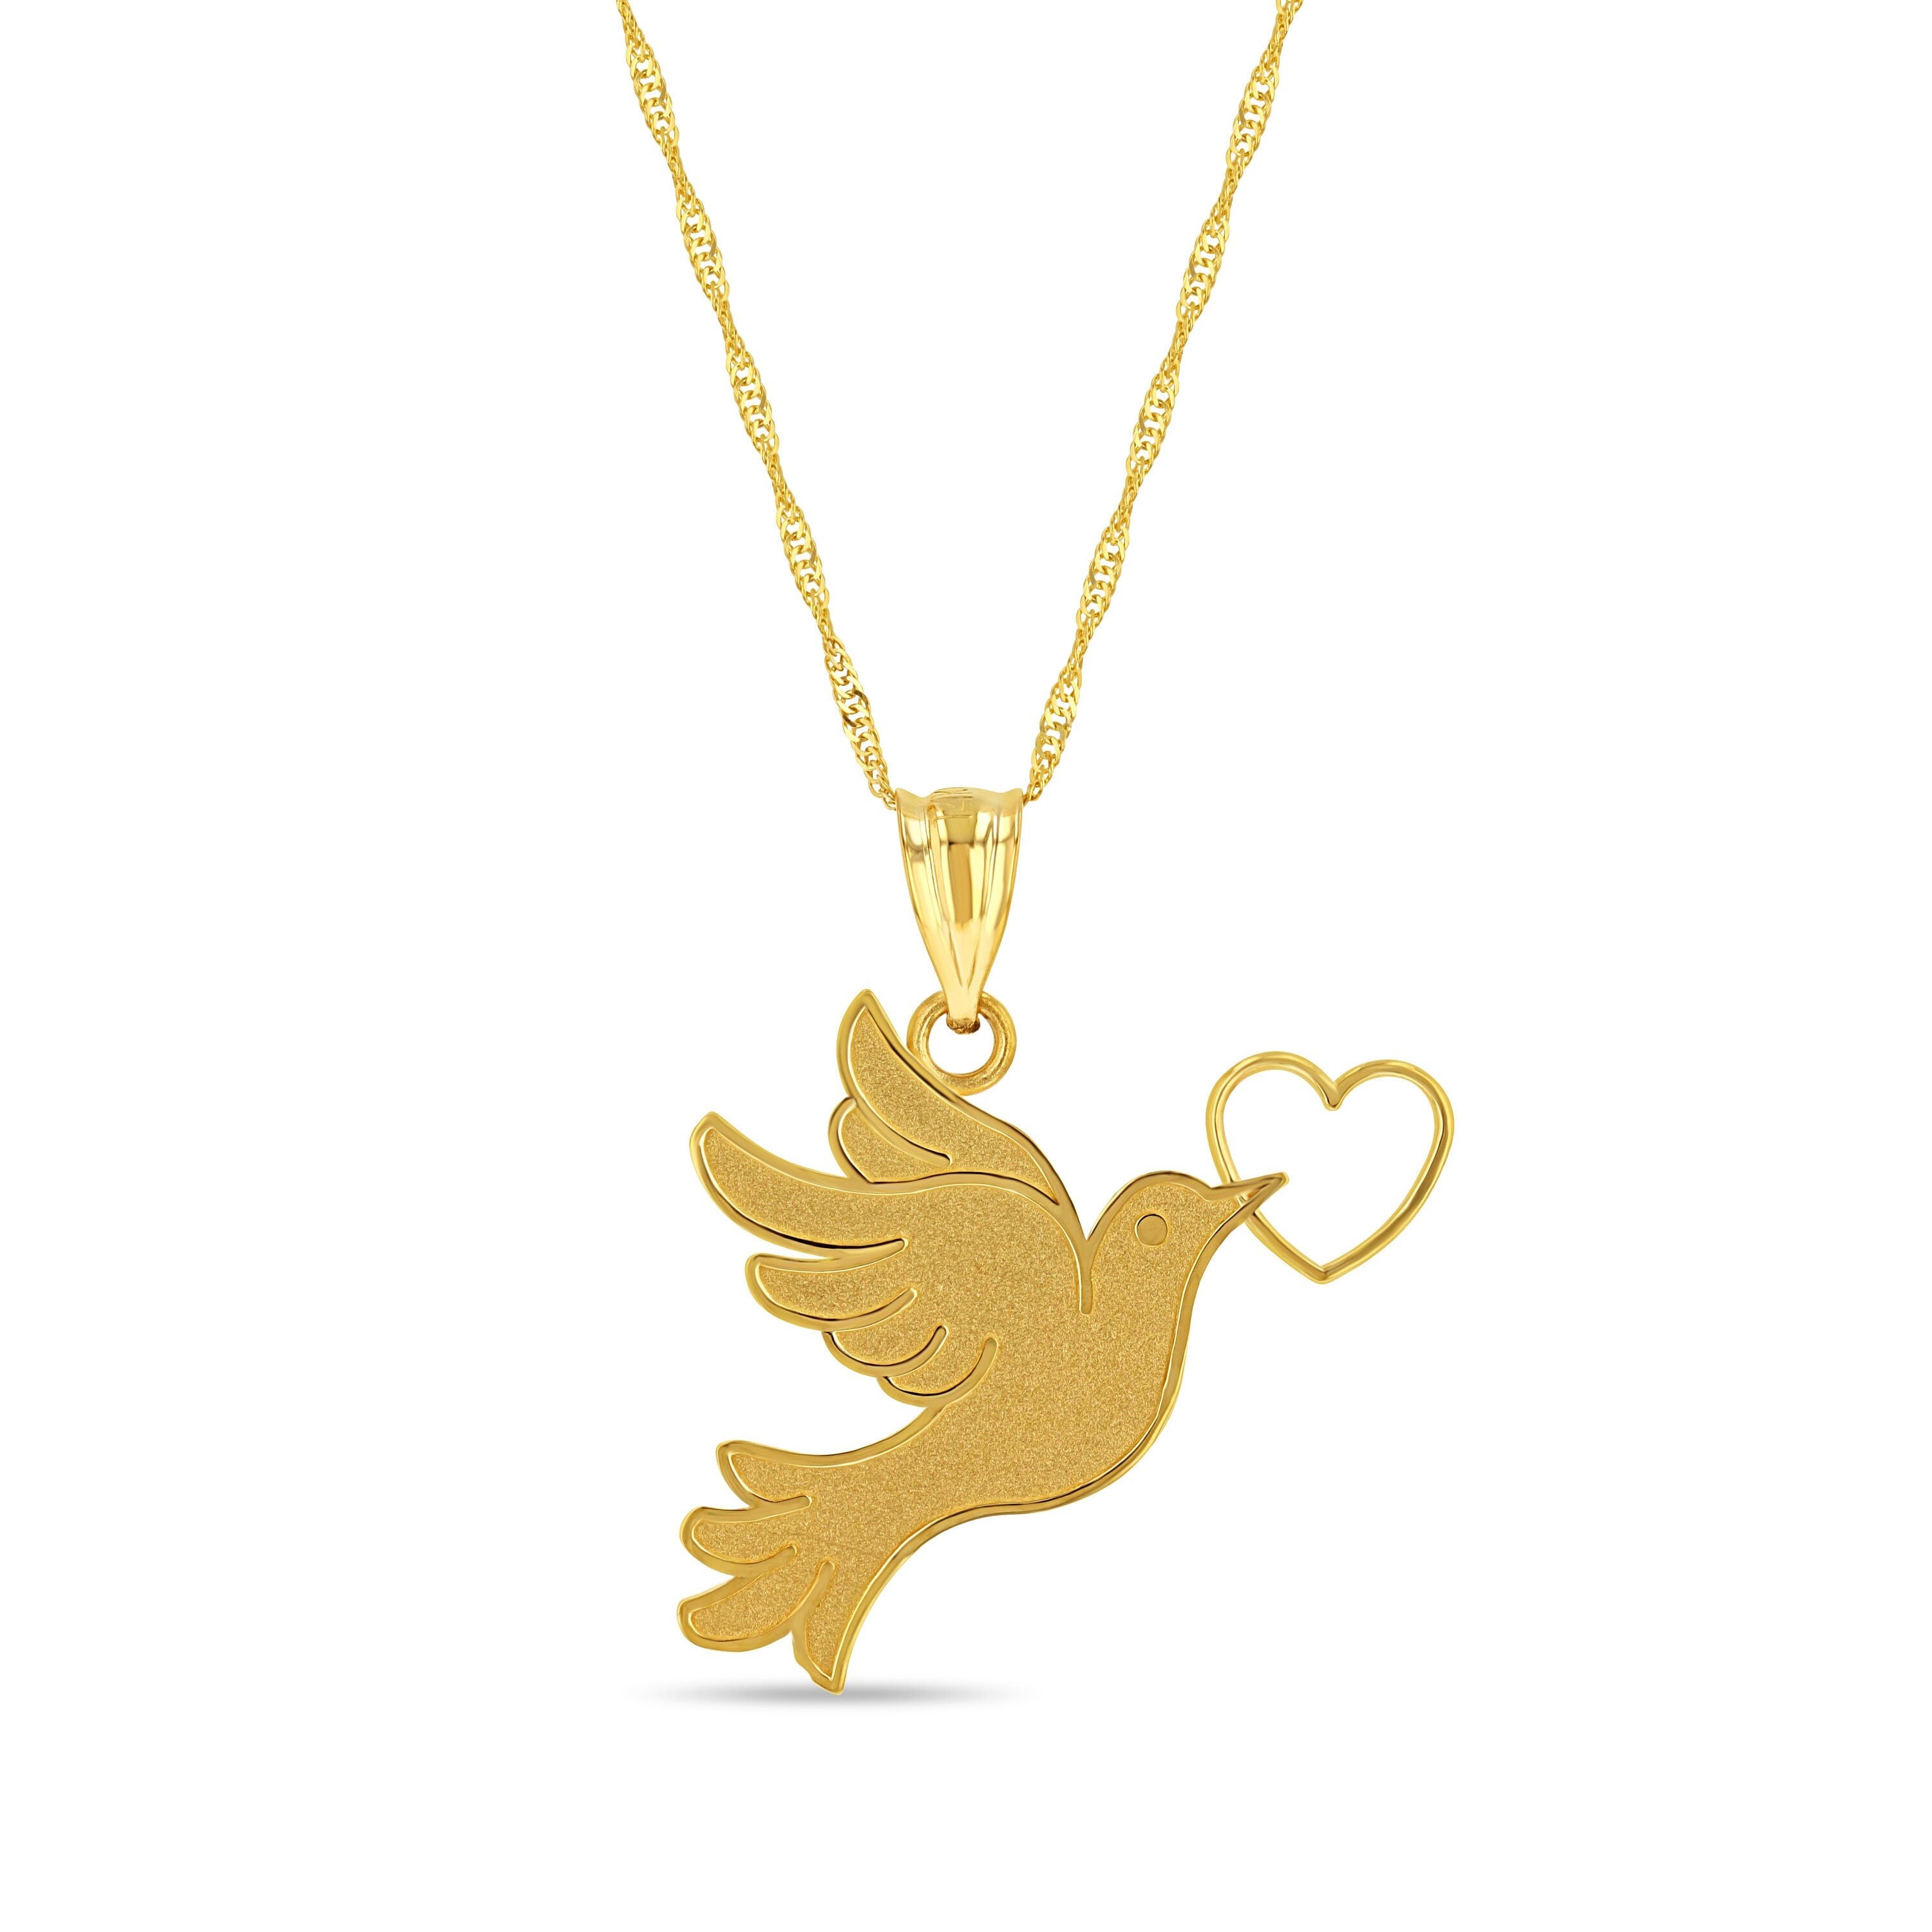 14k solid gold Peace Dove pendant on 18" solid gold chain